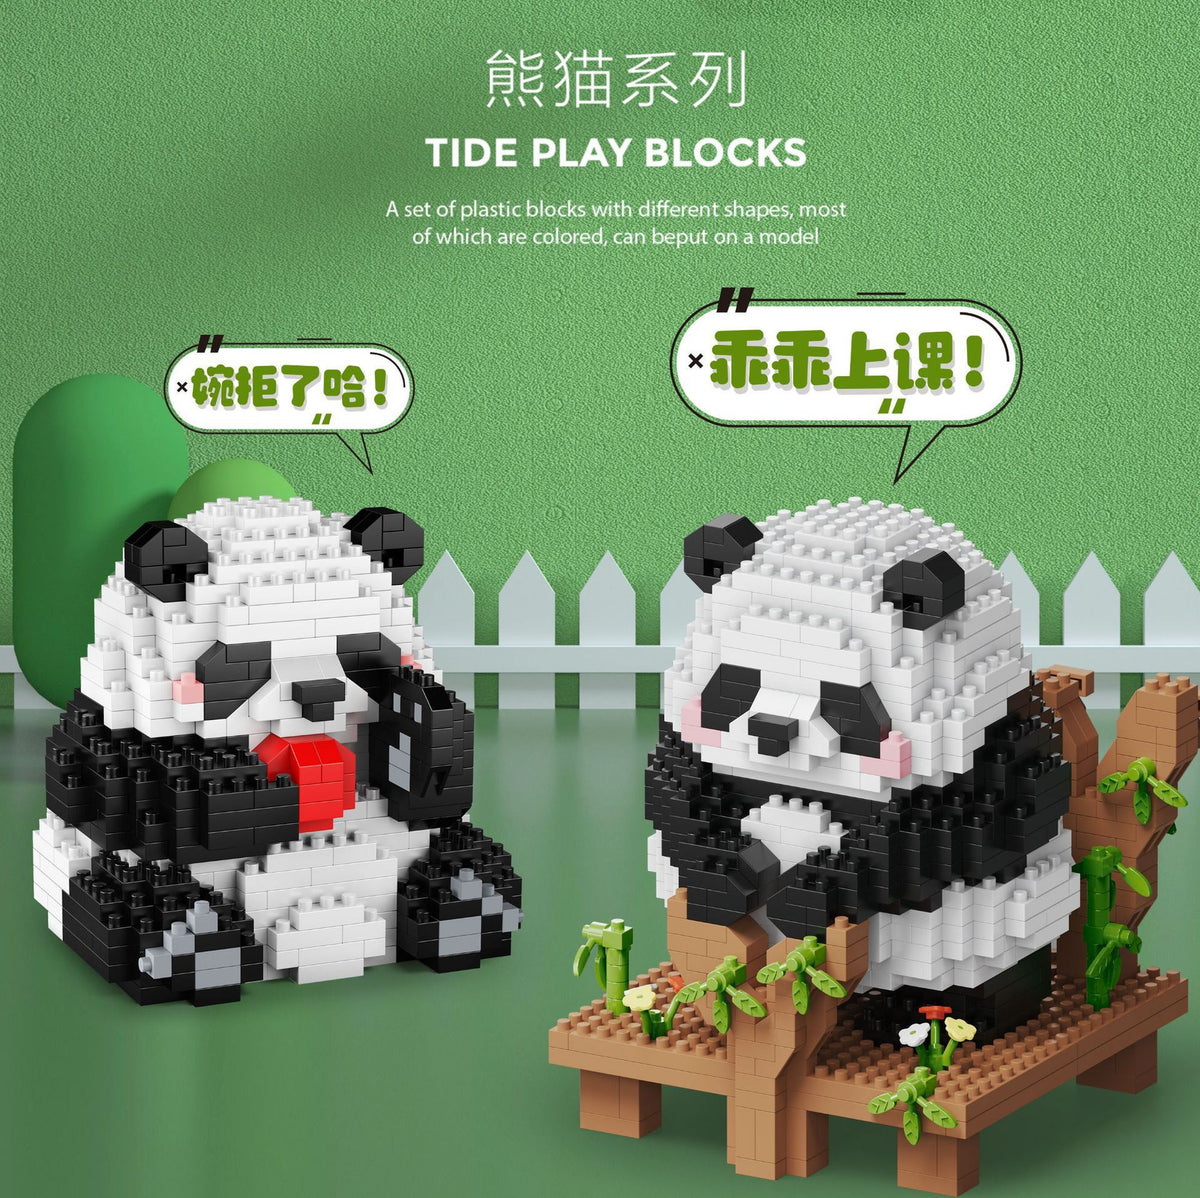 National treasure panda building block flower cute orchid swing one word horse model micro particle assembly toy China-Chic decoration gift